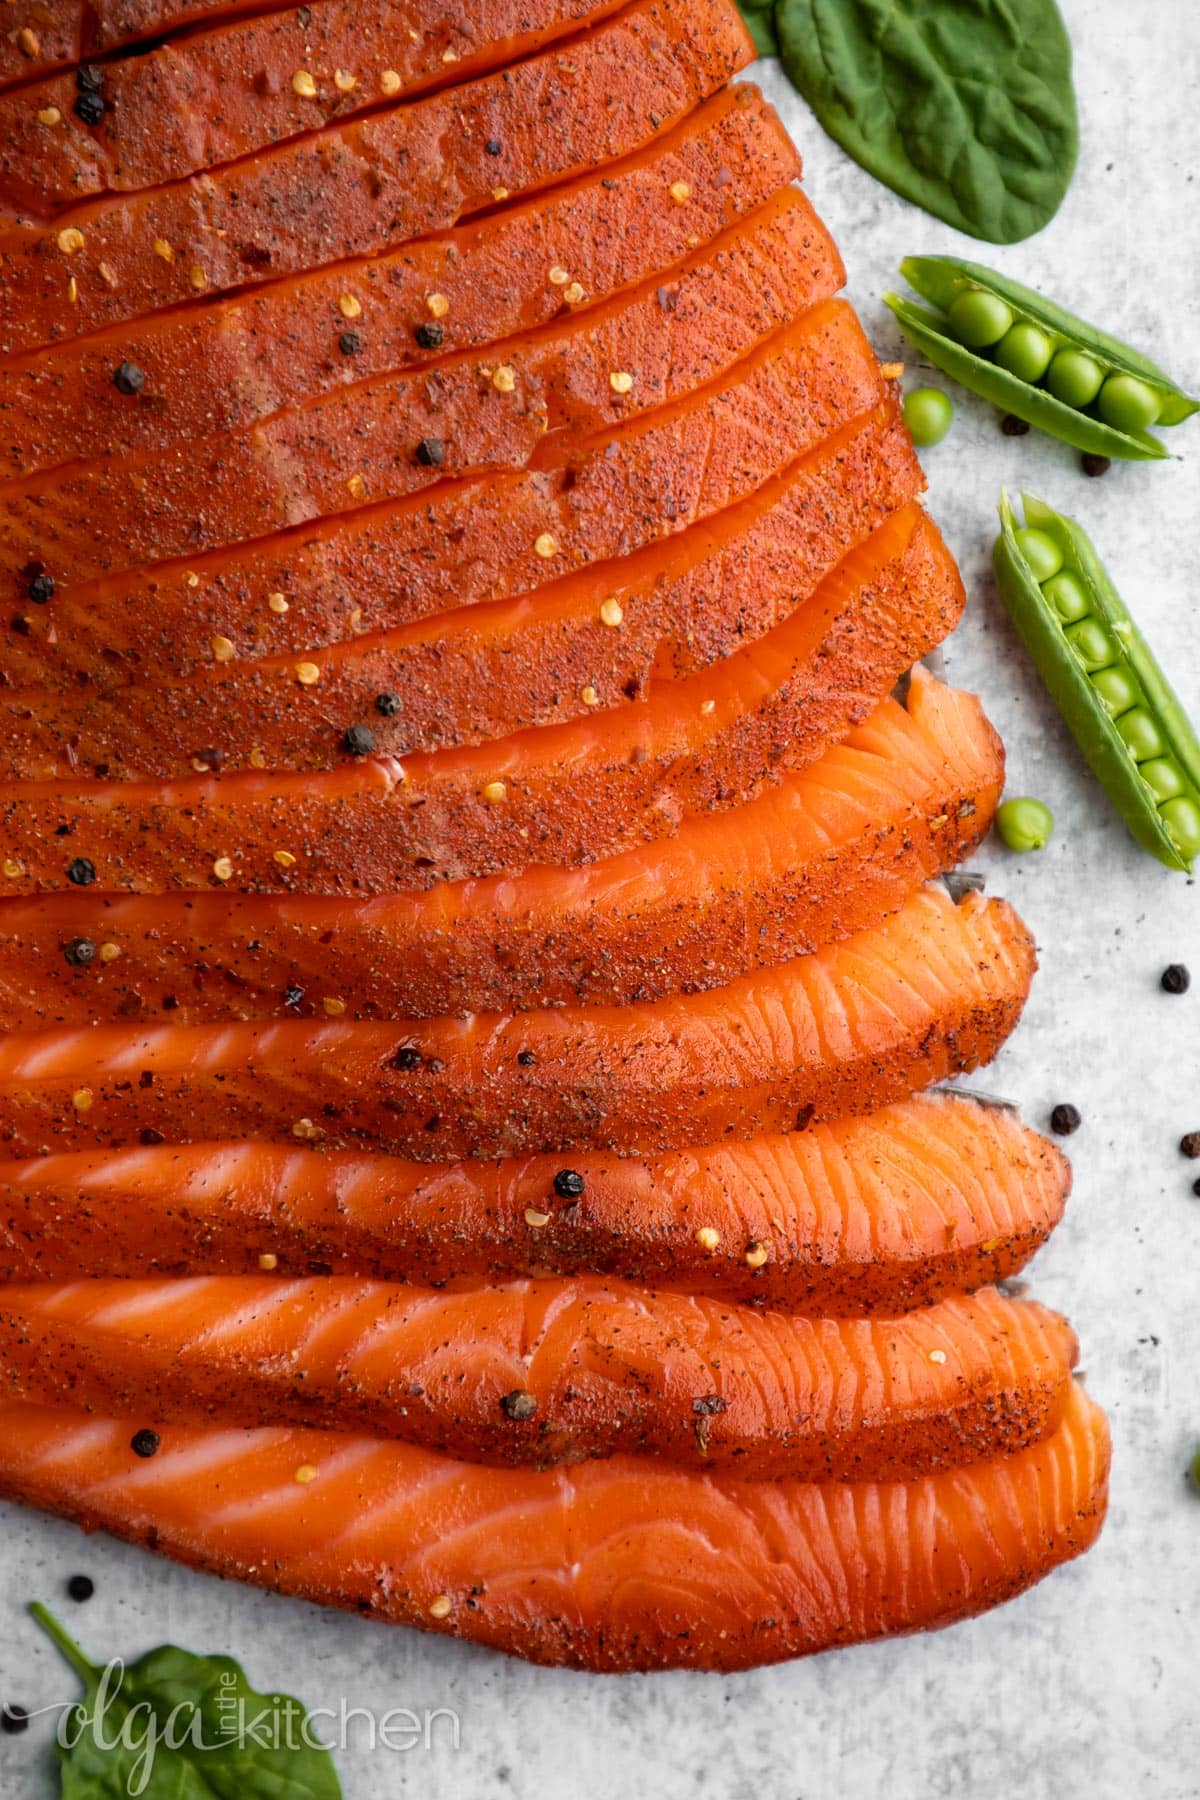 Easy Smoked Salmon is juicy and flaky with a simple salt, sugar and pepper cure. An easy step-by-step guide to make the best and most delicious hot Smoked Salmon at home. #smokedsalmon #salmon #olgainthekitchen #holiday #summer #homemade